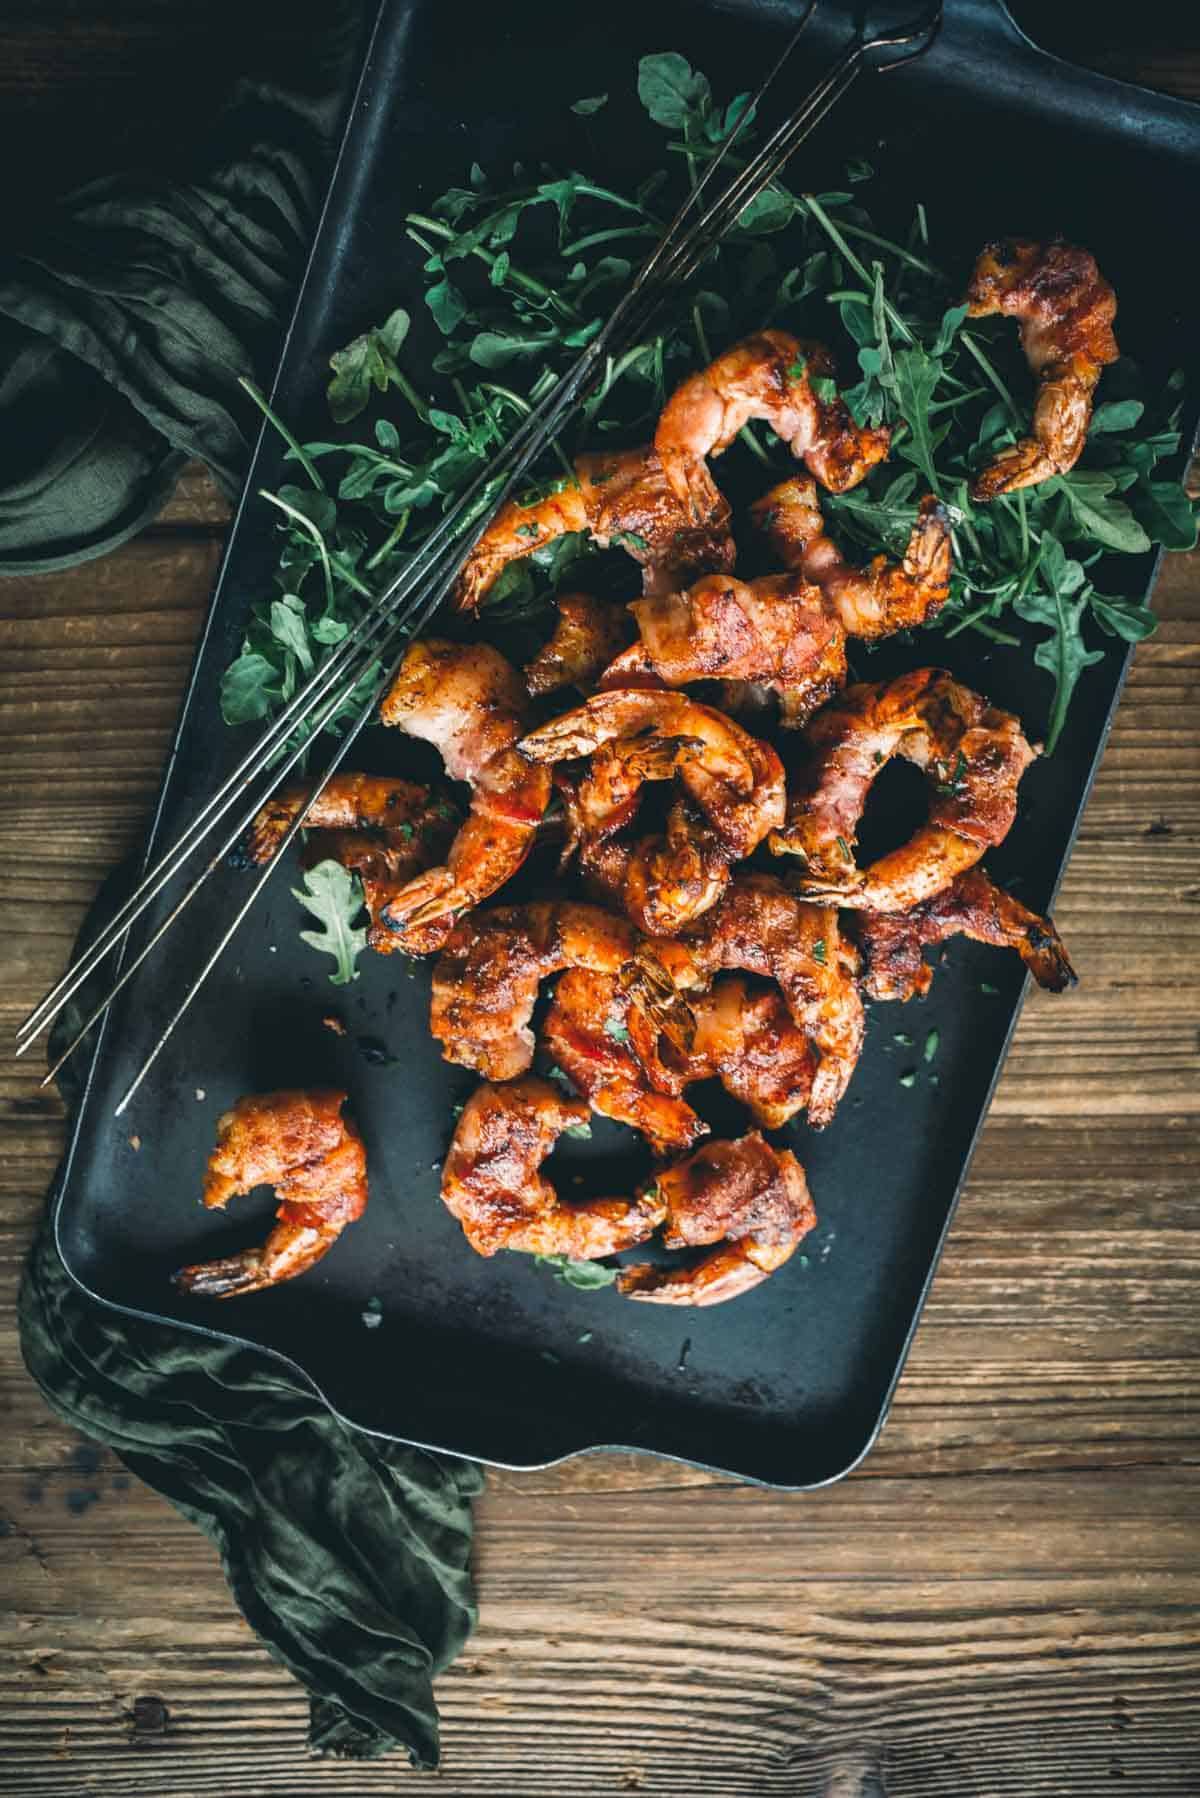 A tray of grilled shrimp wrapped in bacon placed on a bed of greens, with metal skewers on the side, on a wooden surface.